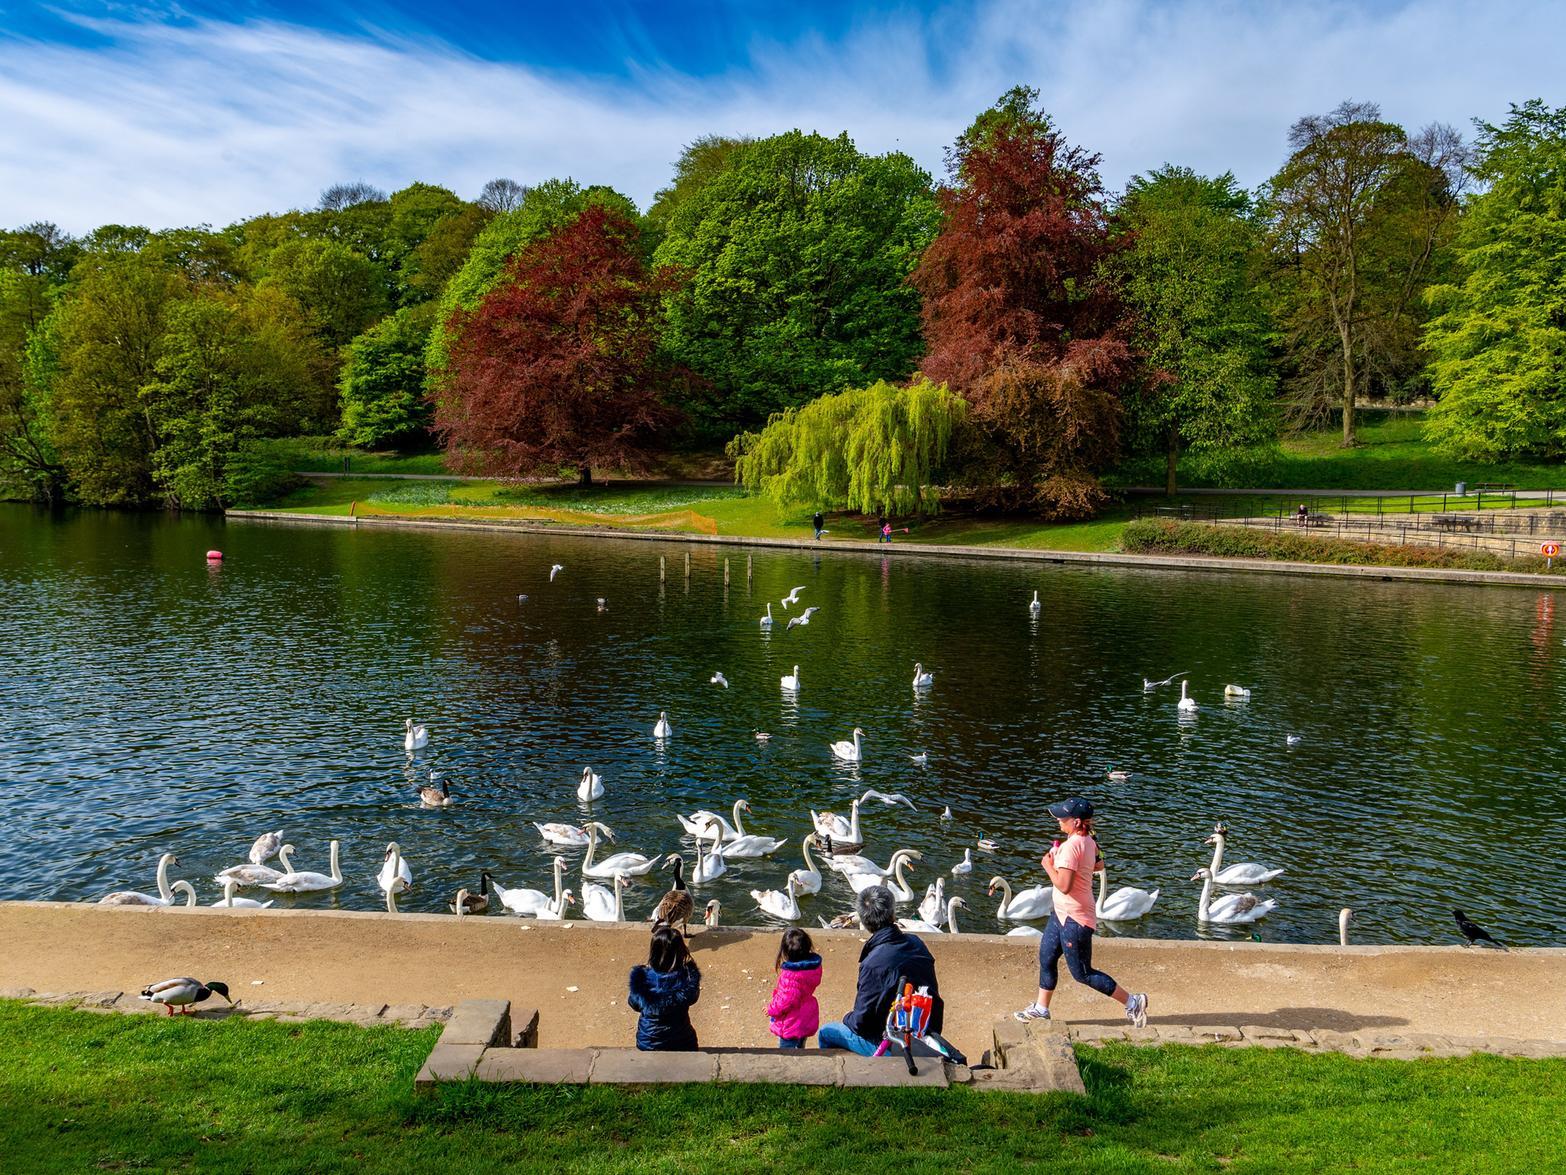 Leeds' biggest park was top-rated on the list of tourist attractions. Roundhay Park has two lakes, a bowling green, a caf and the ever-popular Tropical World.